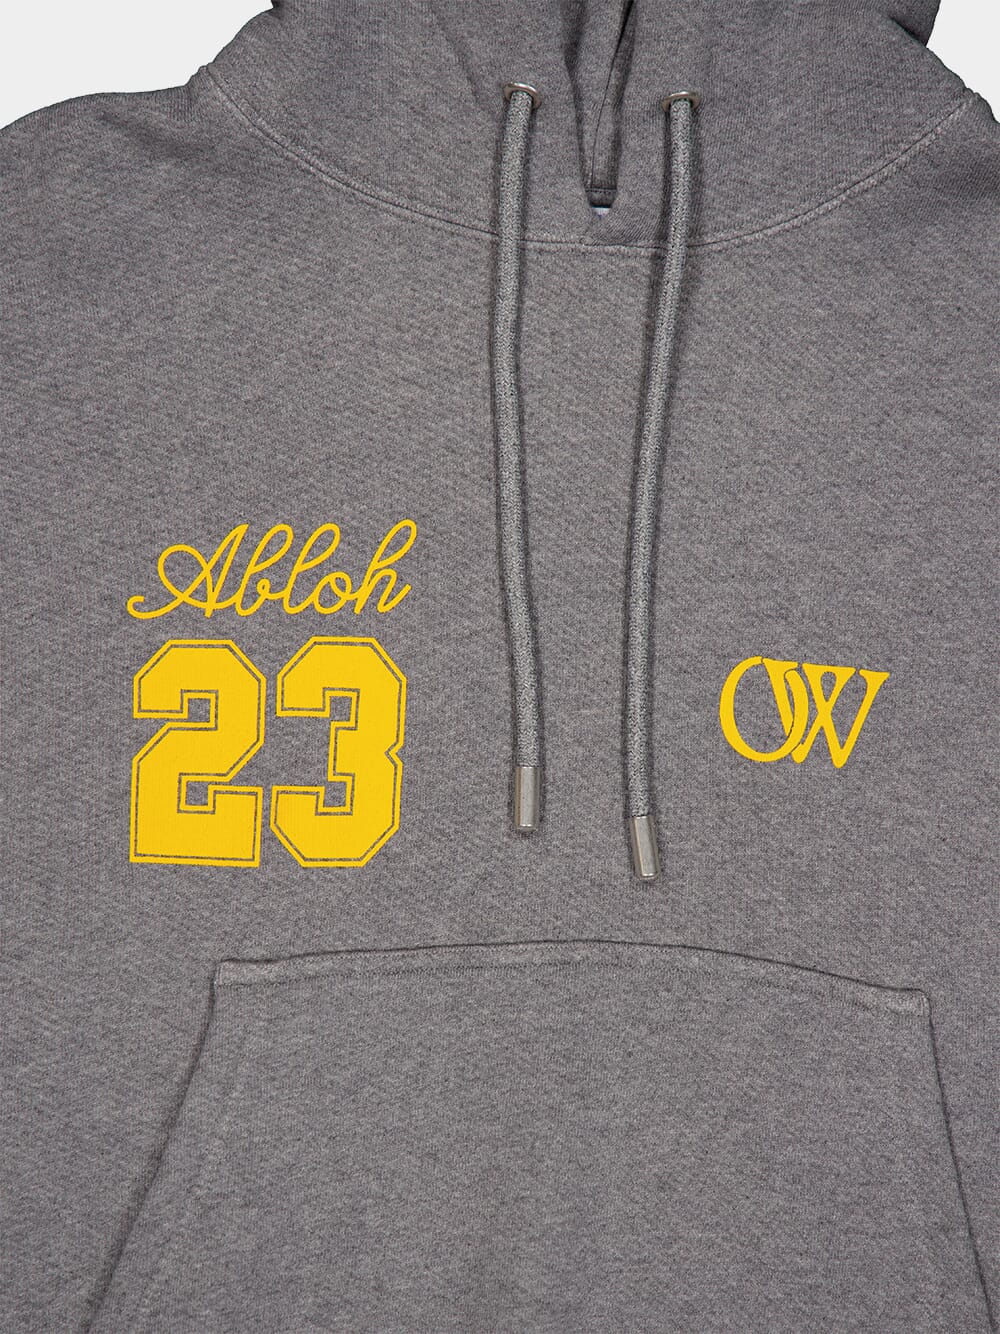 Off-WhiteOw 23 Skate Grey Hoodie at Fashion Clinic